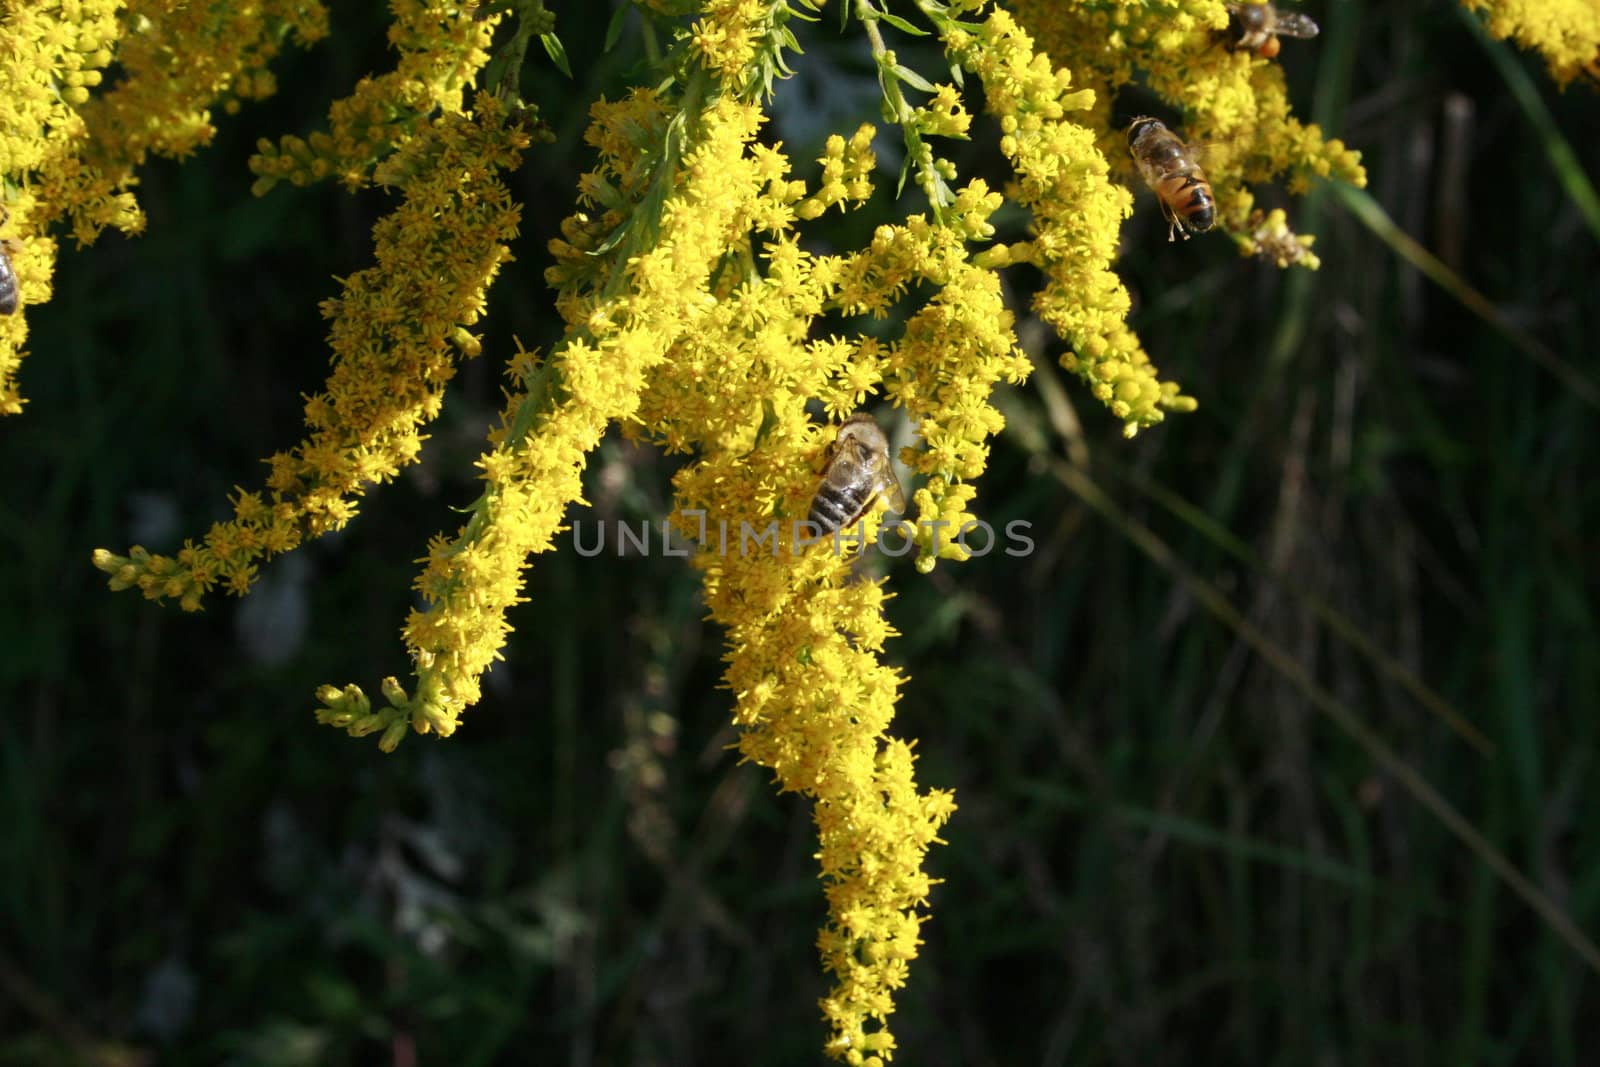 Some bees on the bloom of a Canada goldenrod when polling collecting